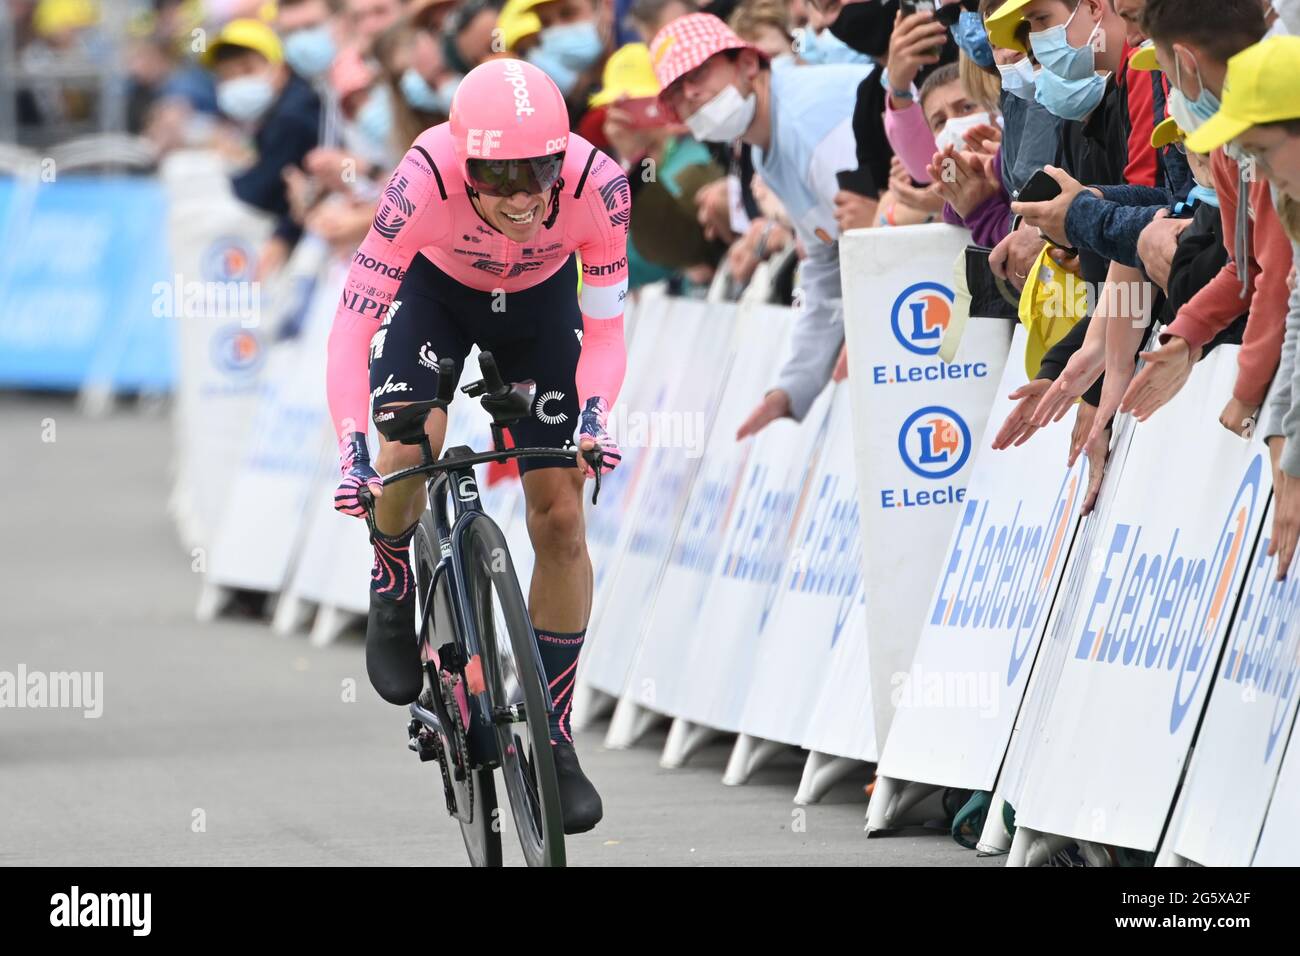 Laval, France. 30th June, 2021: Laval, France. 30th June, 2021. Tour de France 2021, Stage 5, Individual Time Trial from Change to Laval. Rigoberto Uran for EF Education in the final metres of the race. Credit: Peter Goding/Alamy Live News Stock Photo